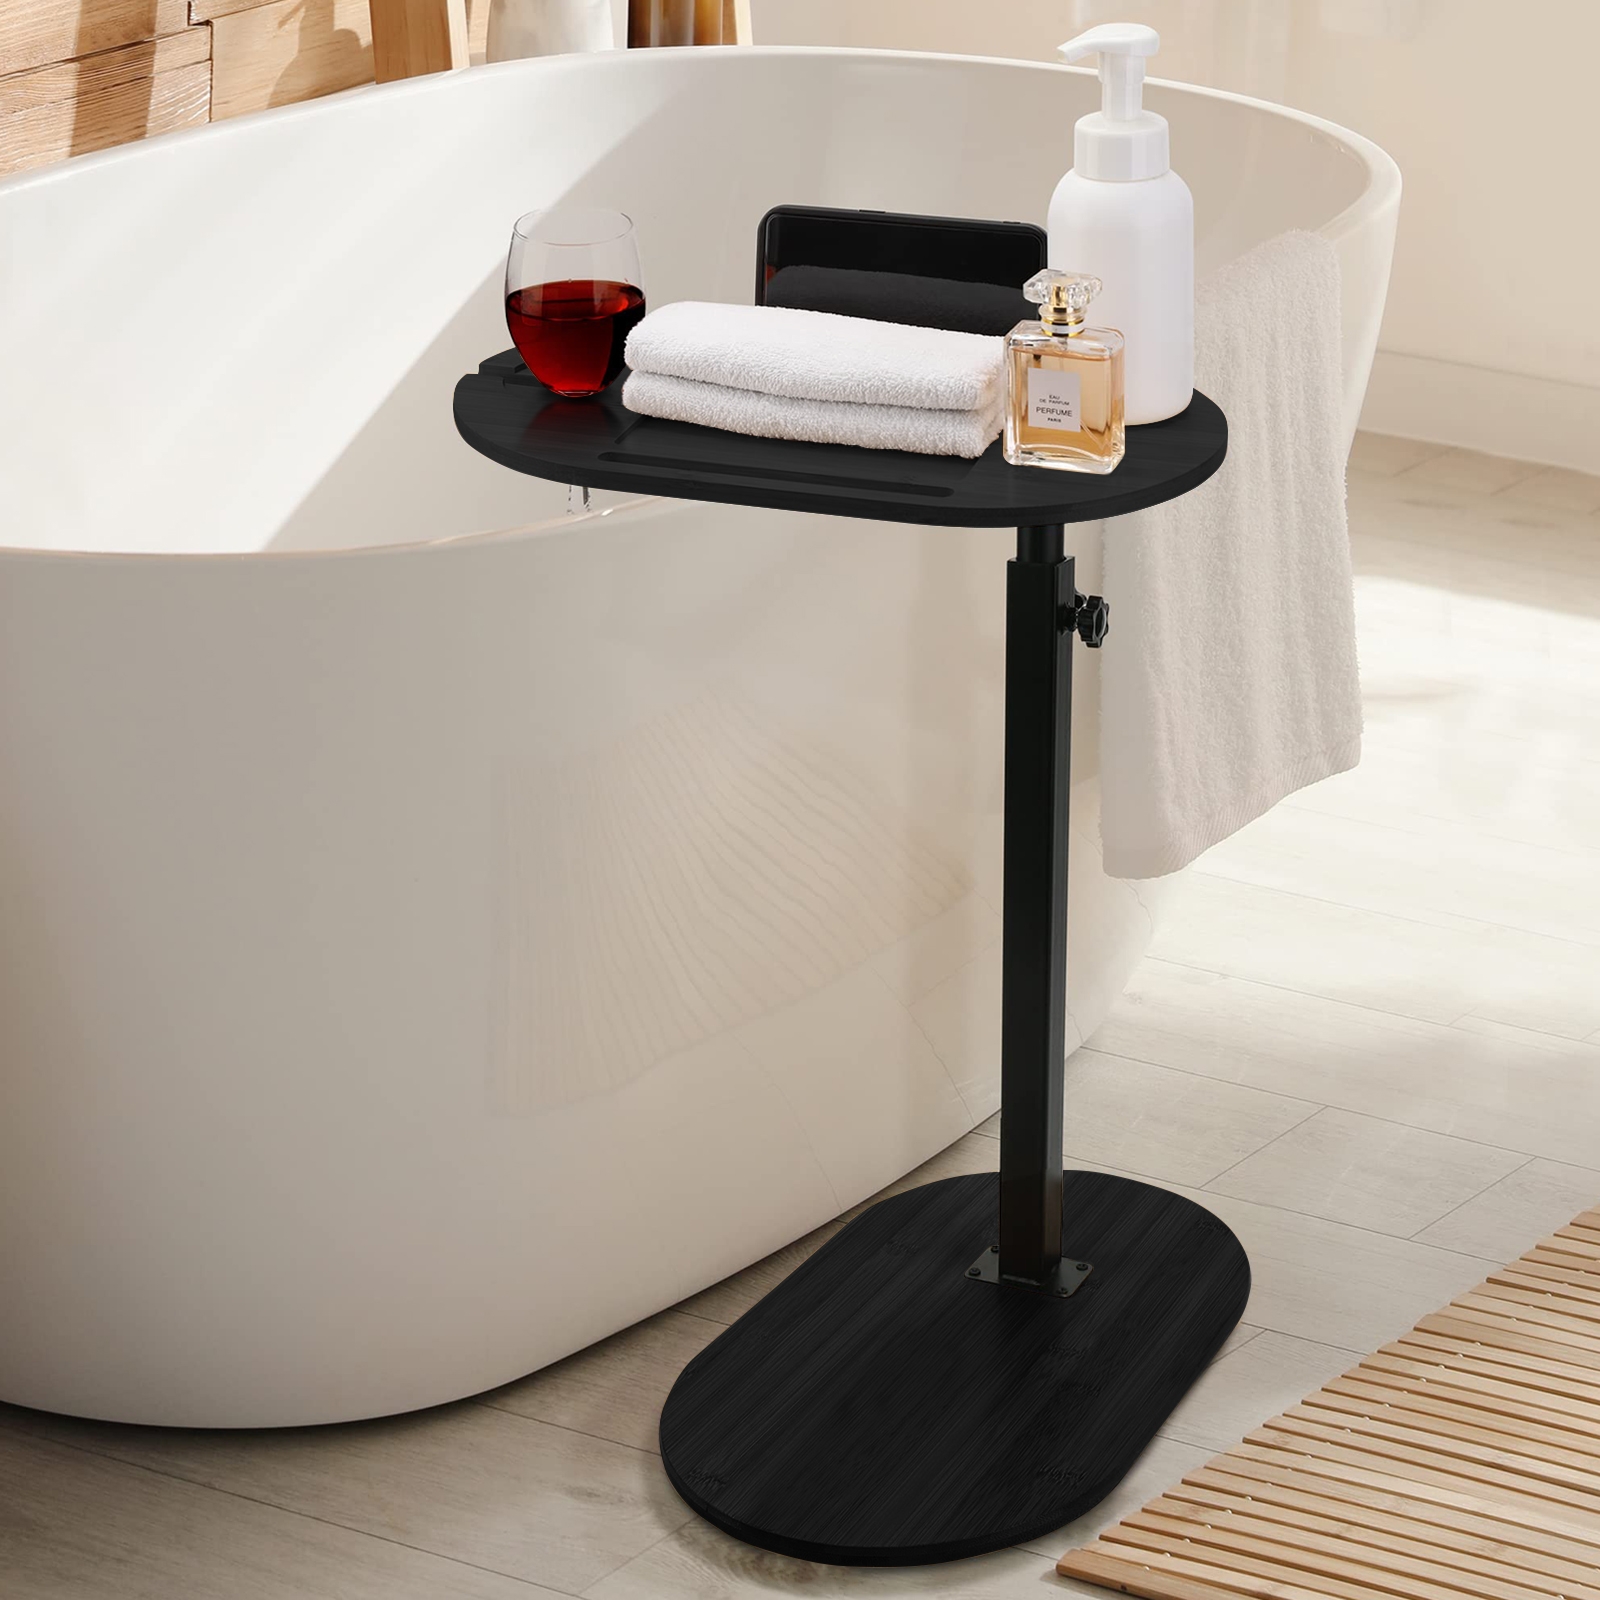 Bamboo Black Bath Tub Caddy C Shape Side End Table Height Adjustable Coffee Tray Rotating Wine Glass Phone Holder